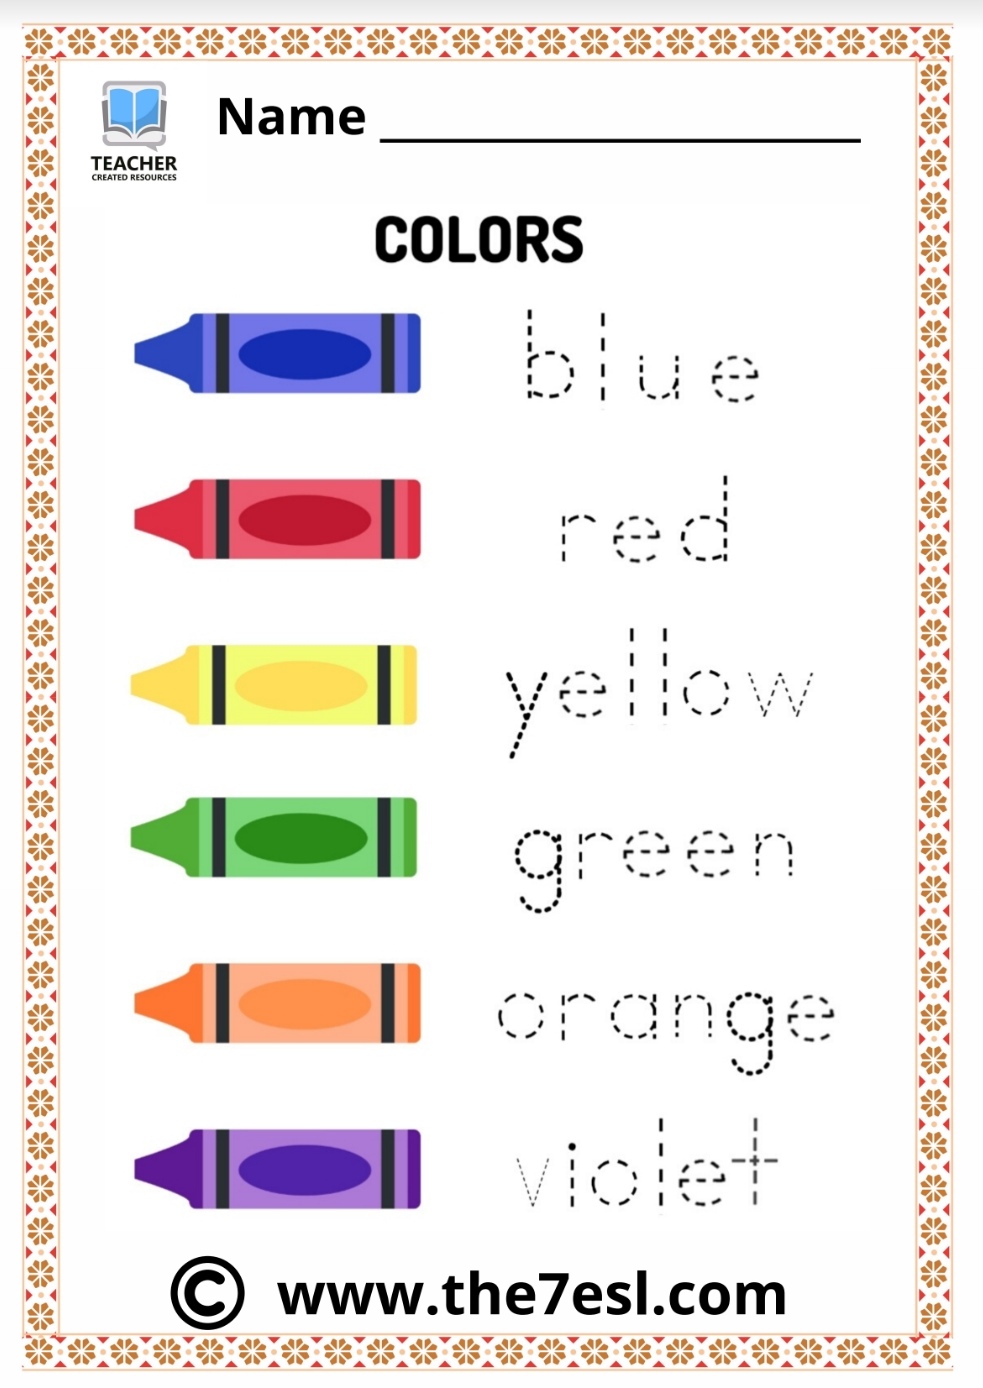 colors-and-shapes-worksheets